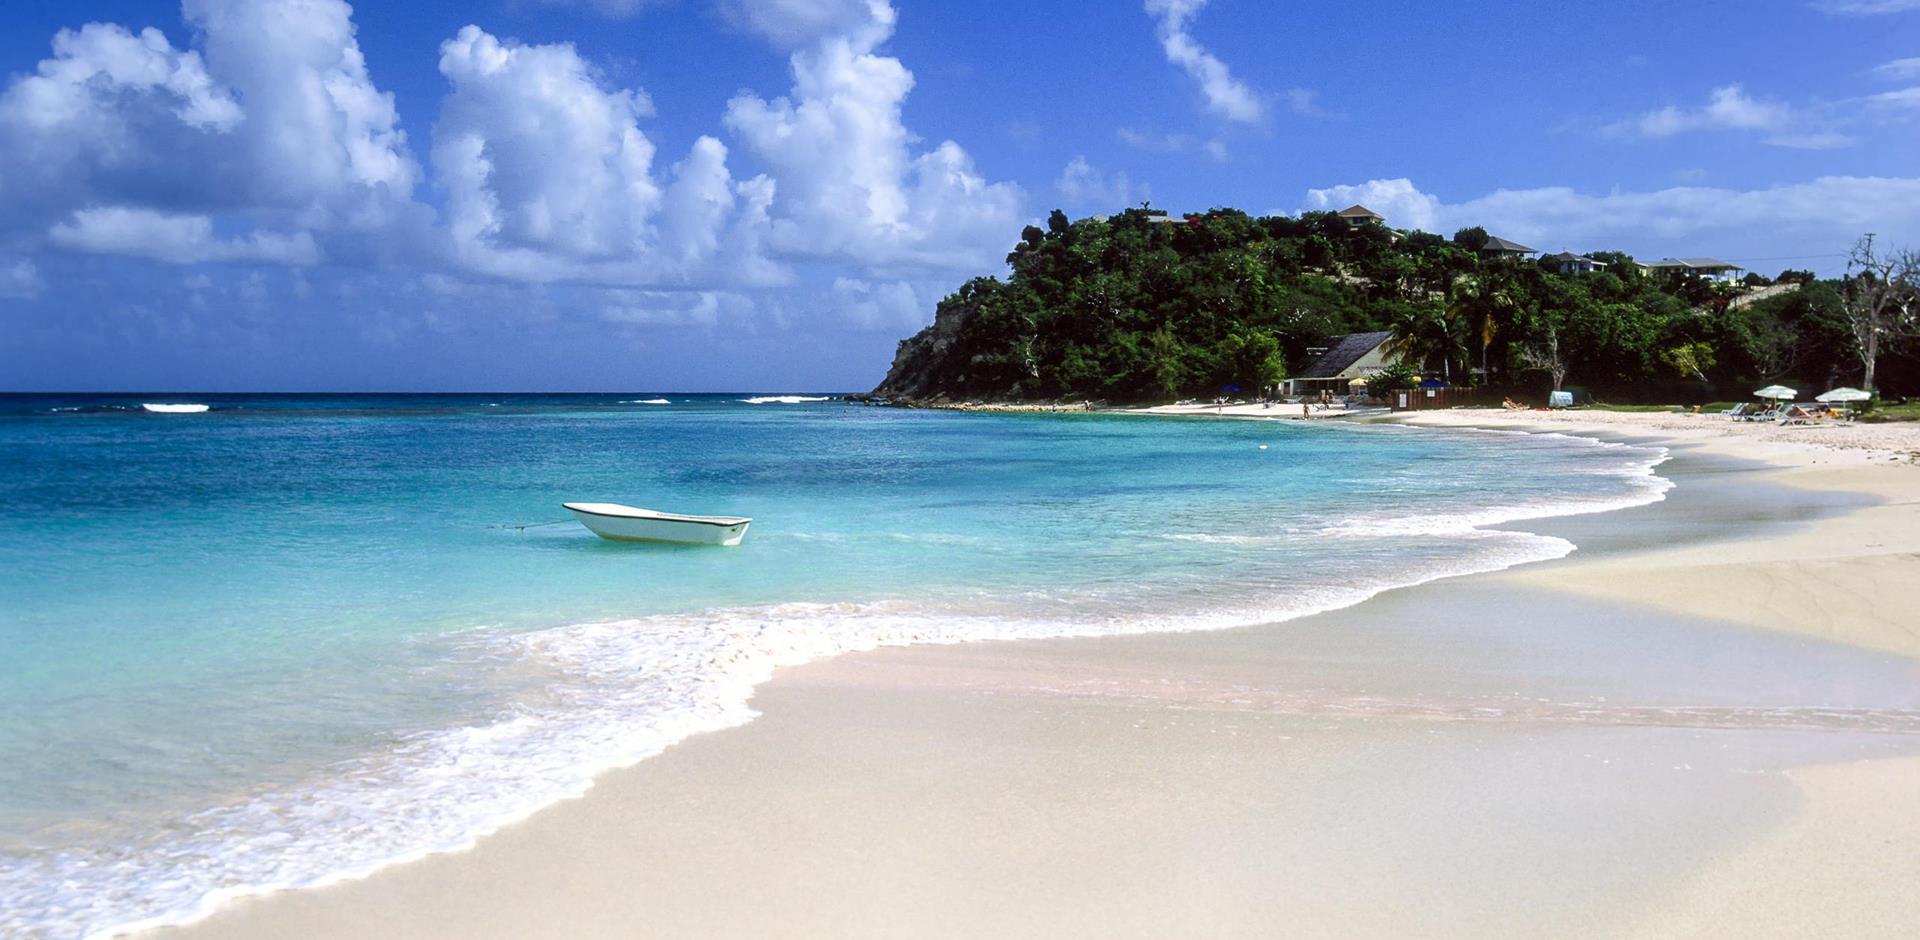 Landscapes of the Caribbean, Luxury travel with A&K